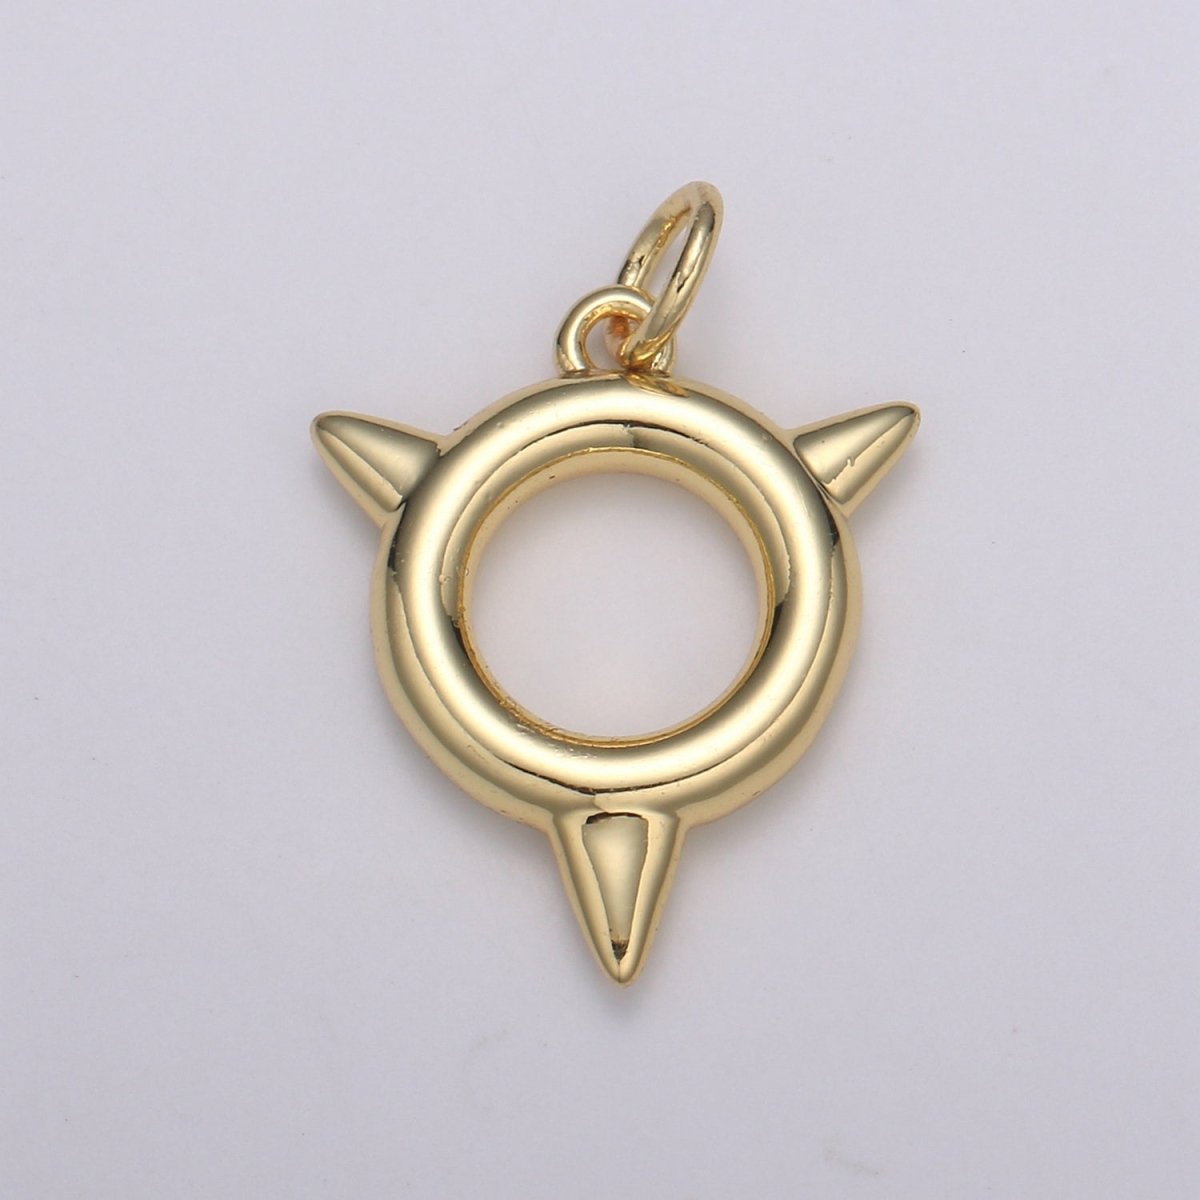 Spike Charm, 24K Bouy Pendant 23X7mm Mobility Jewelry Outdoor Activity Inspired, Metro Style Design E-191 - DLUXCA